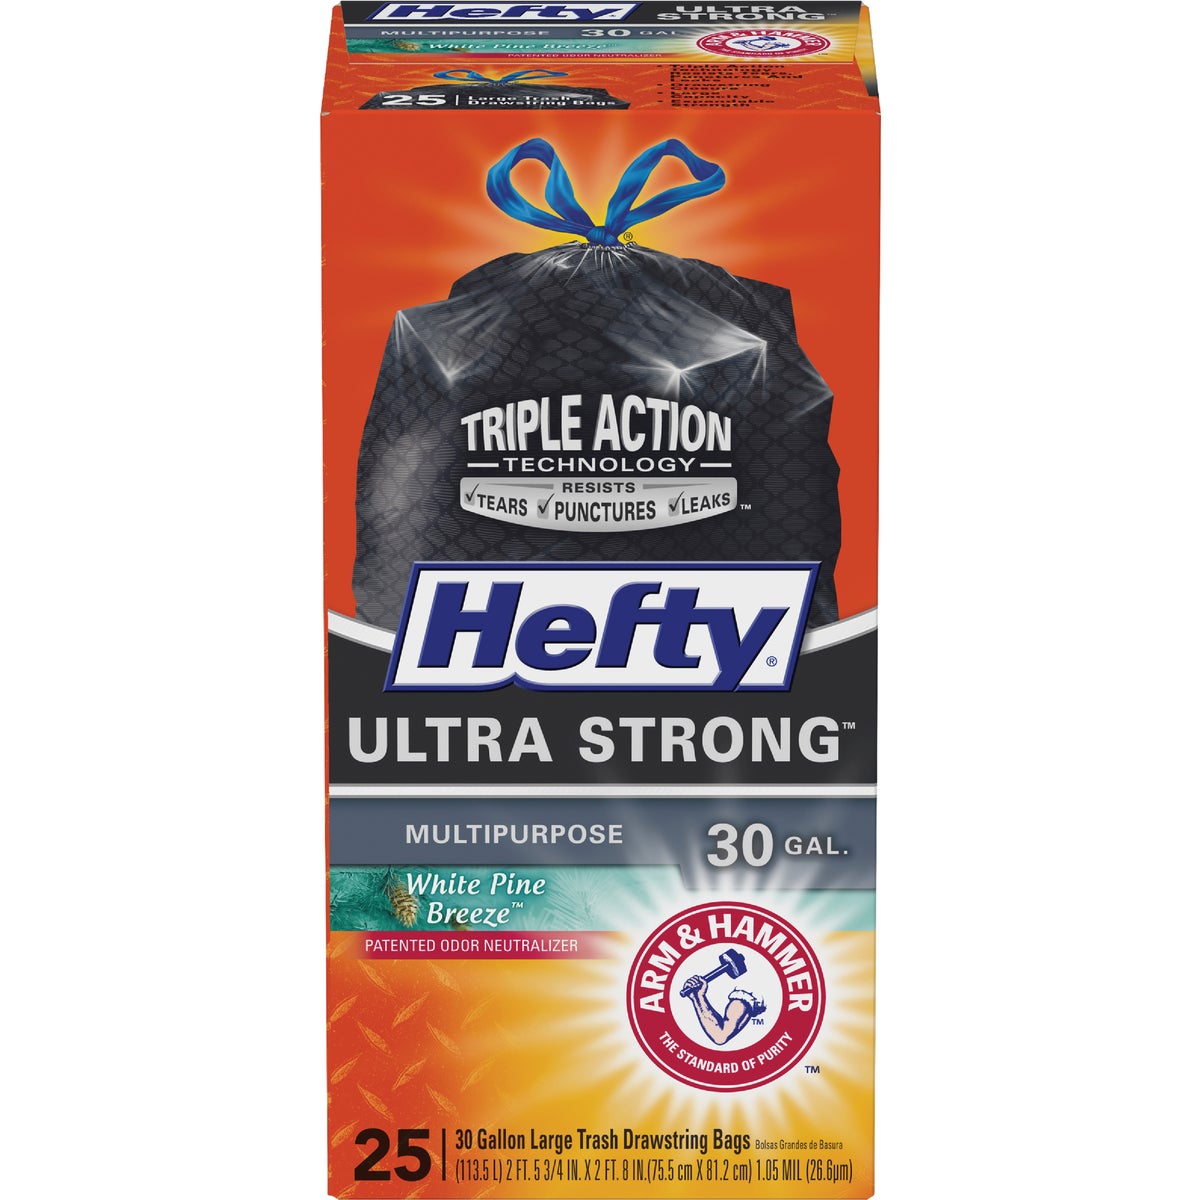 Item 601979, Ultra strong trash bag has a White Pine Breeze scent with Arm &amp; Hammer 